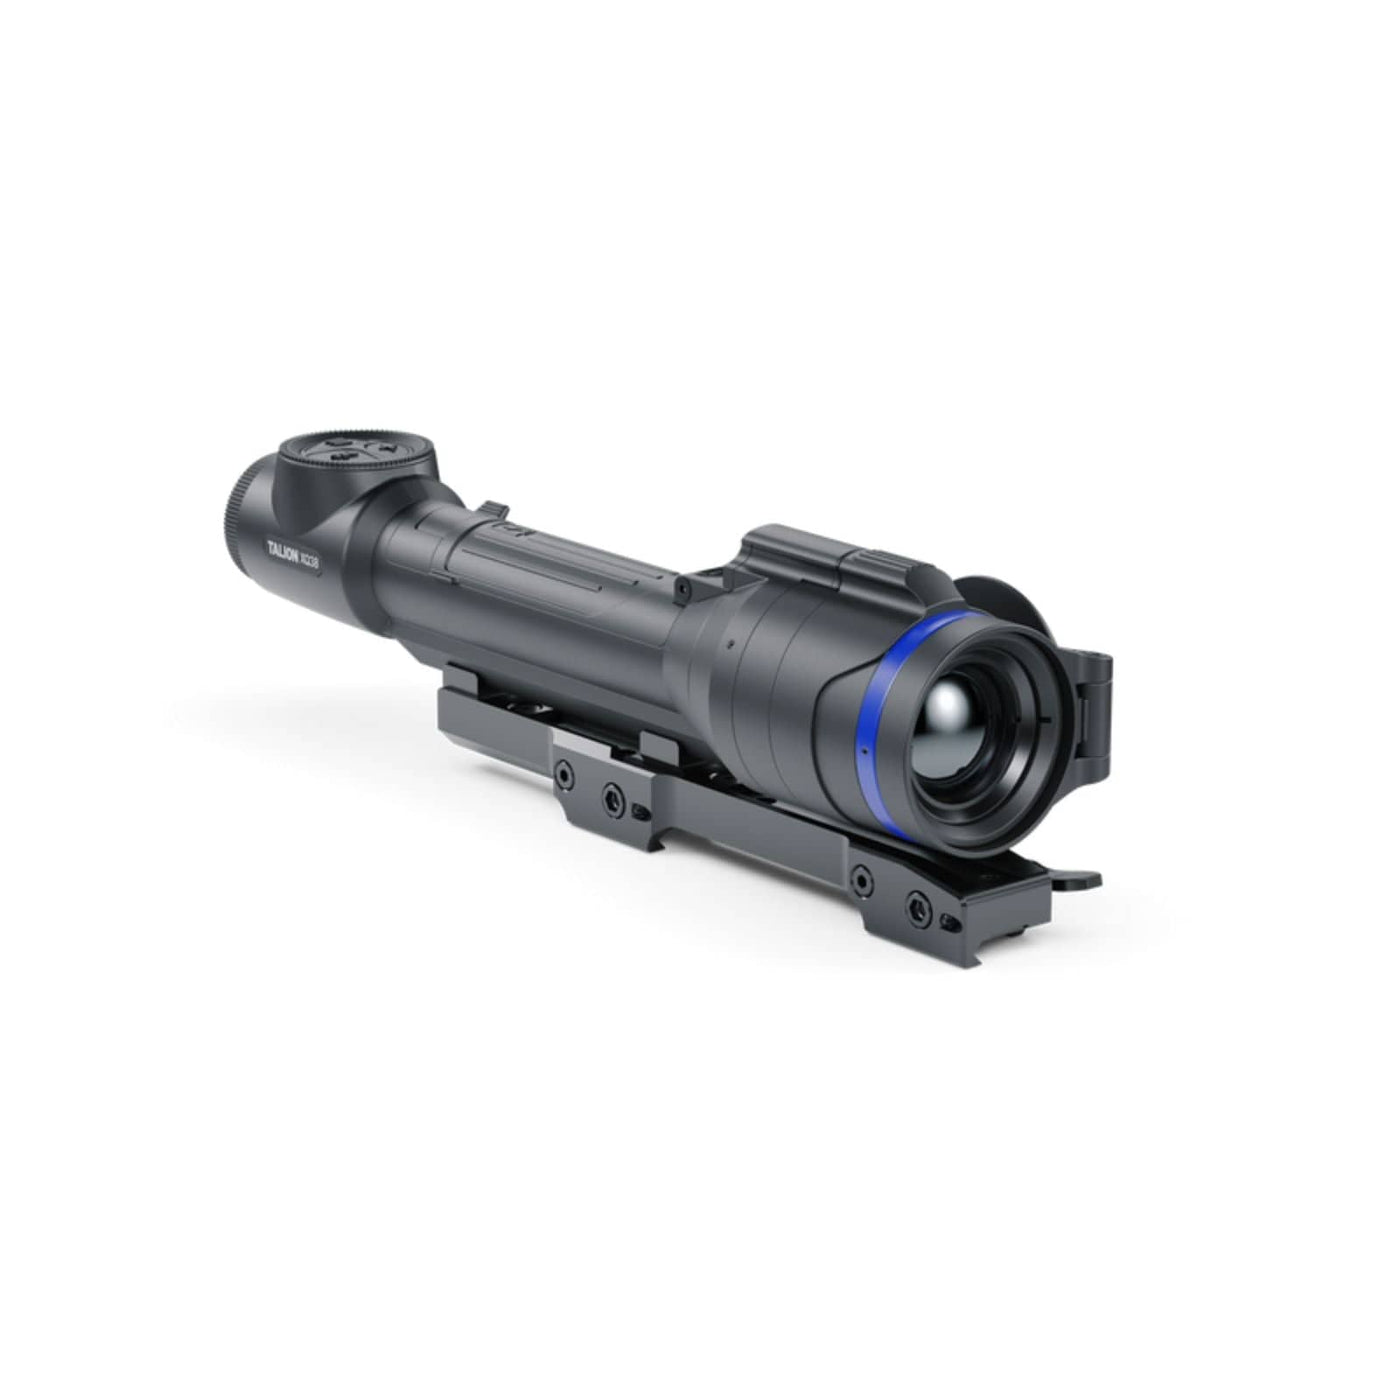 Pulsar Pulsar Talion XQ38 Thermal Riflescope Nightvision And Thermal